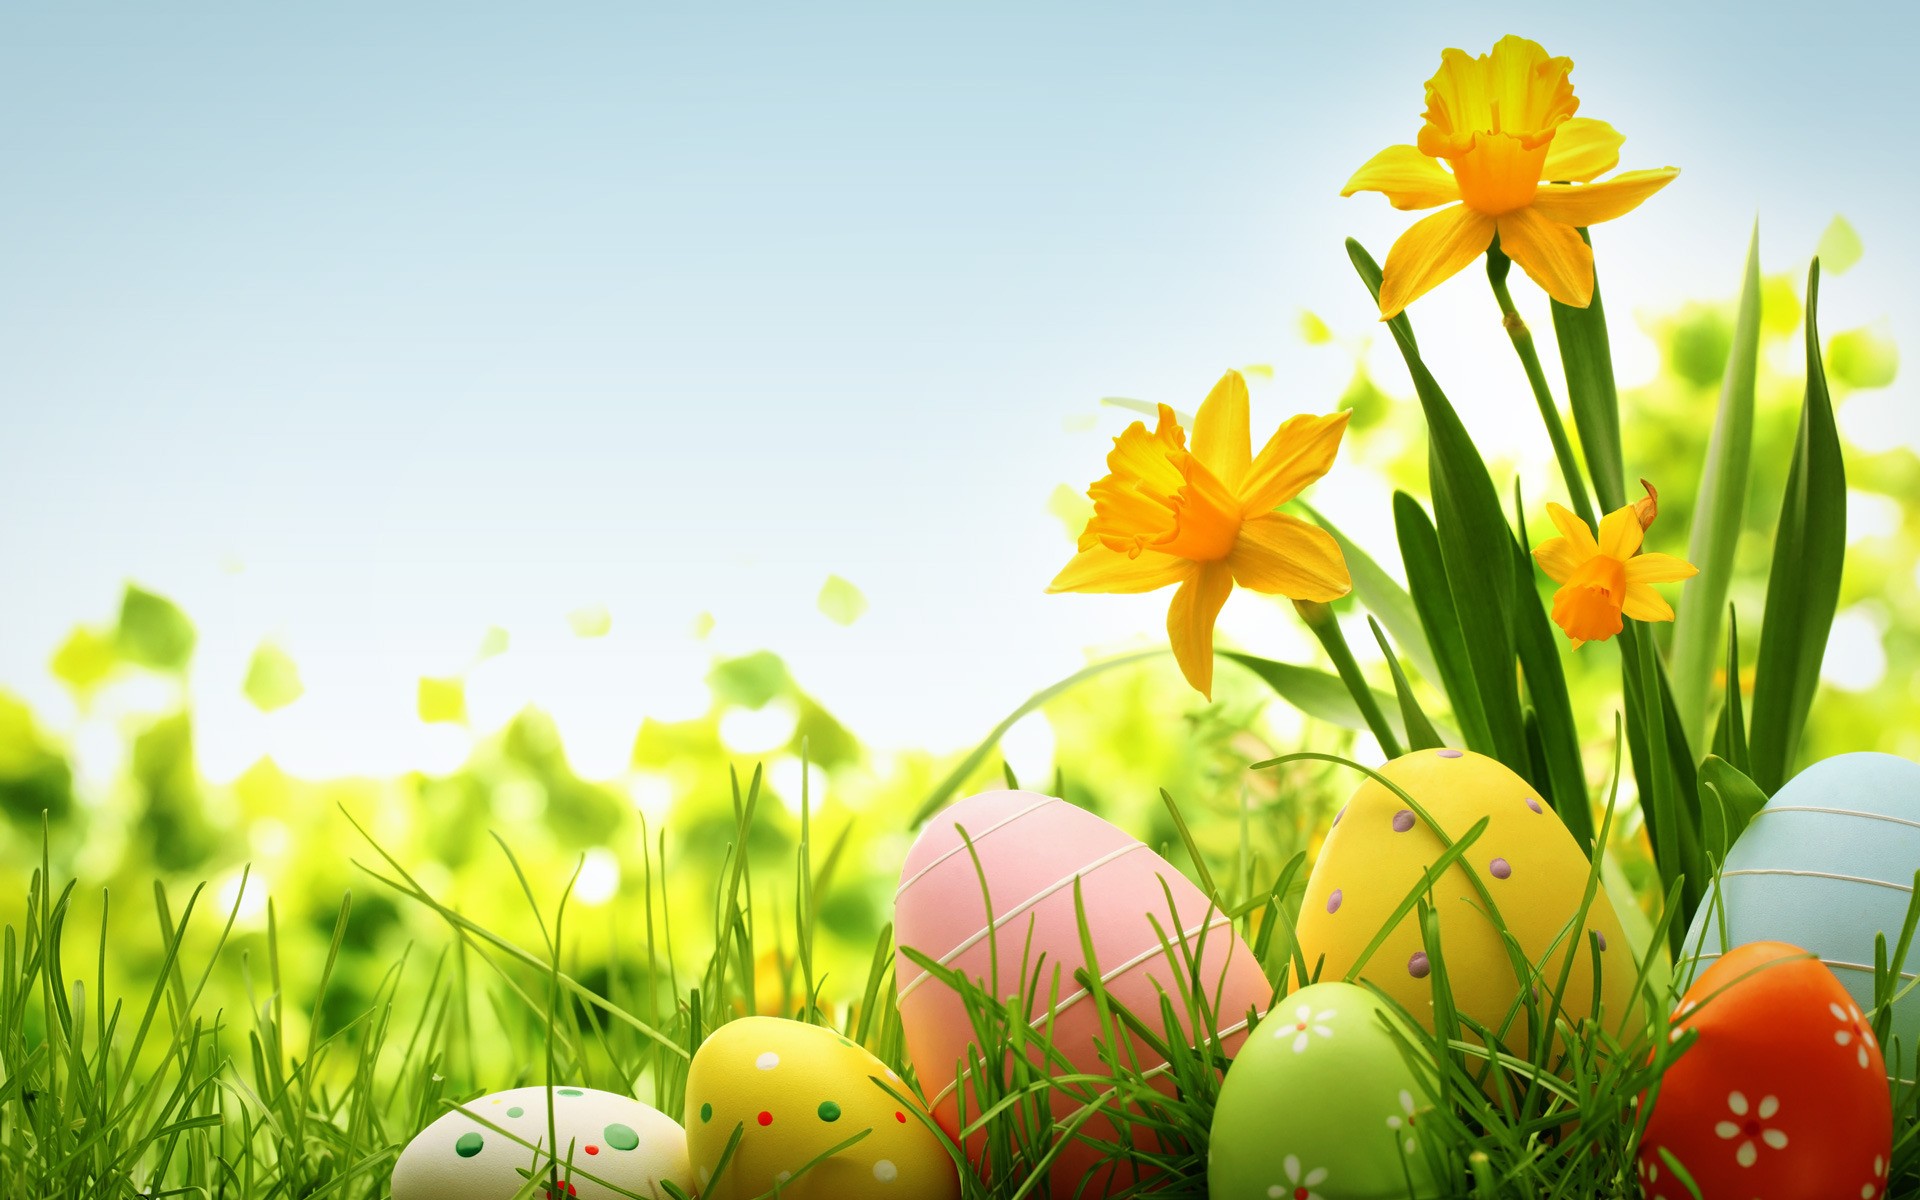 HD Easter Wallpaper Picture Image Cool 1080p Smart Phone